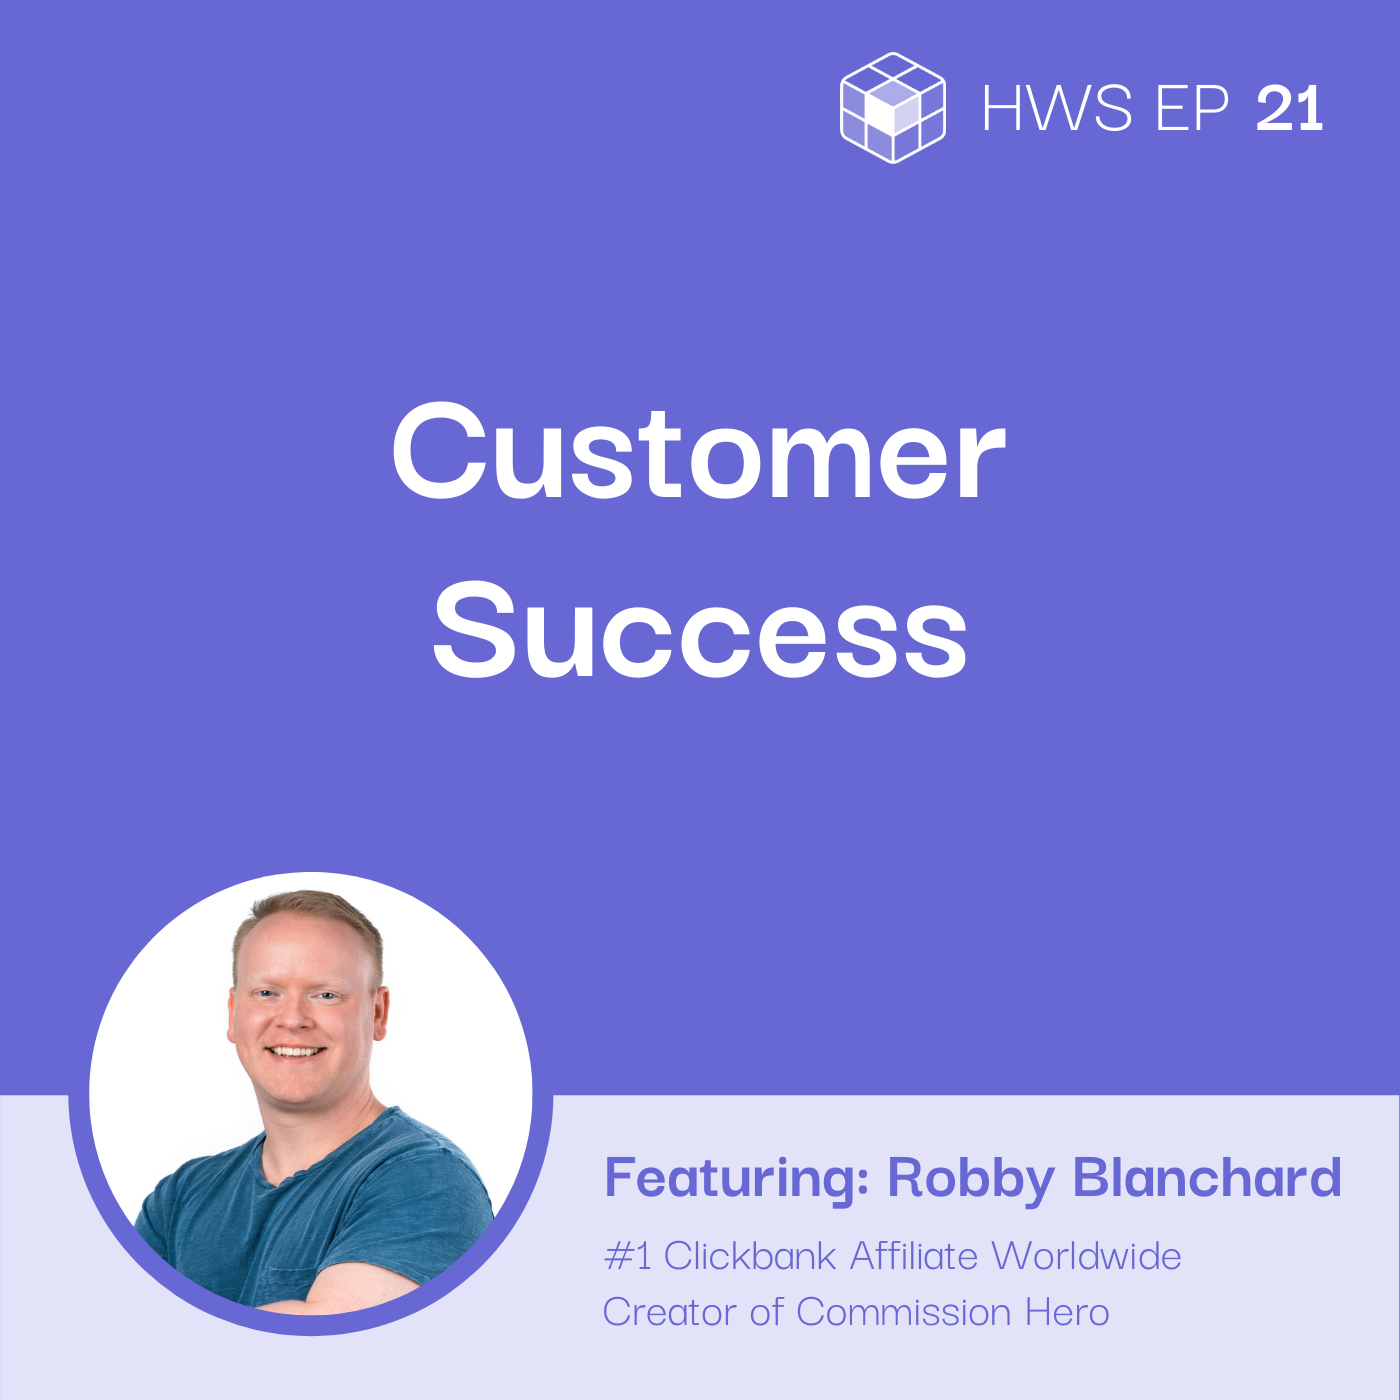 Robby Blanchard shares advice for new online business owners on how to prepare for the influx of customers